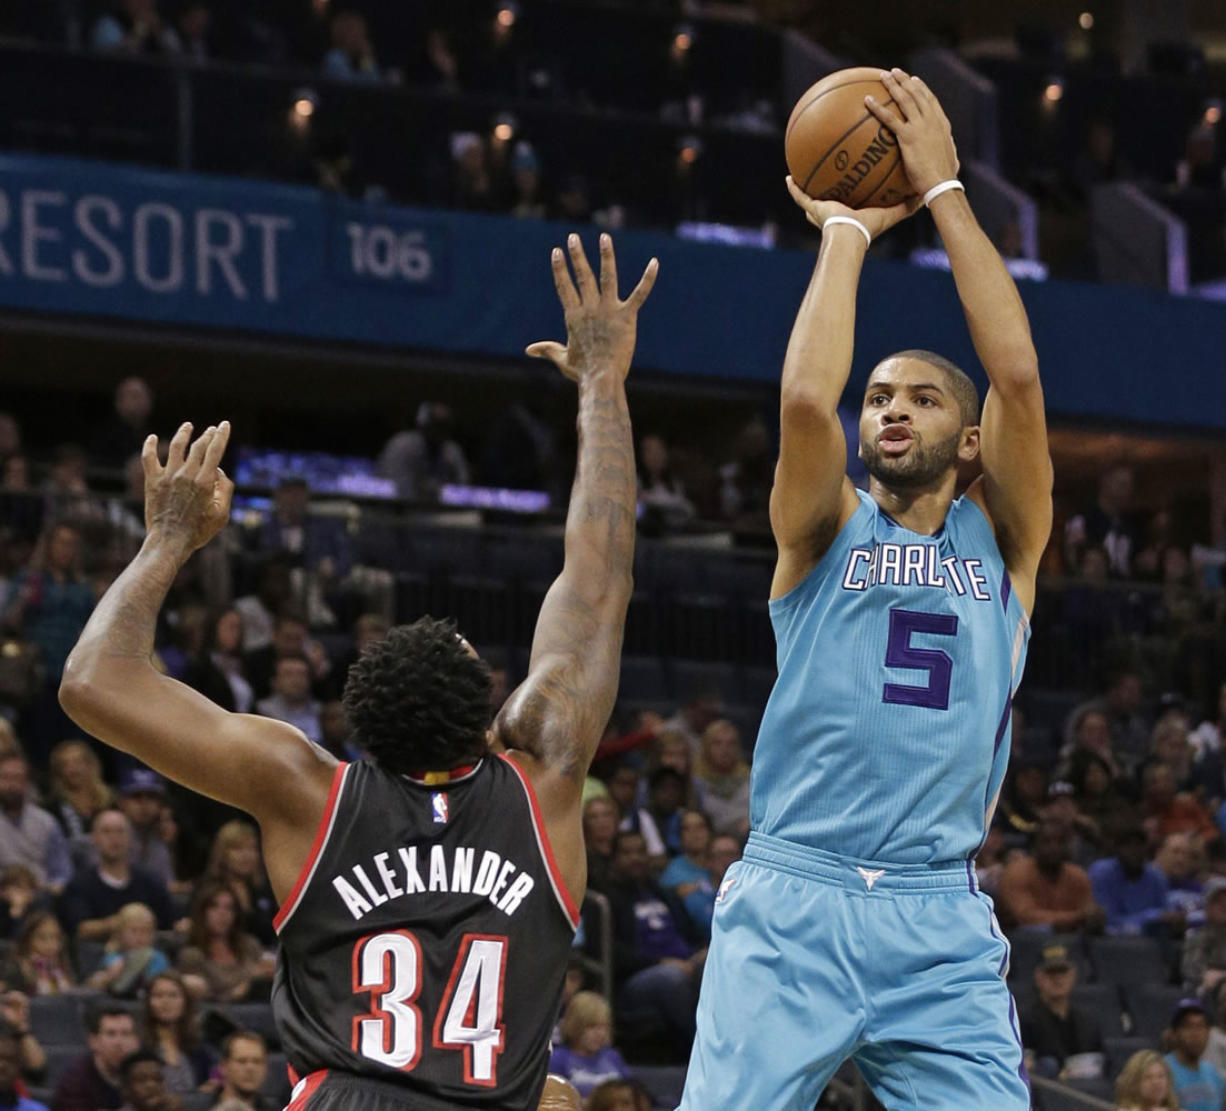 Charlotte Hornets' Nicolas Batum shoots over Portland Trail Blazers' Cliff Alexander during the first half of an NBA basketball game in Charlotte, N.C., Sunday, Nov. 15, 2015.